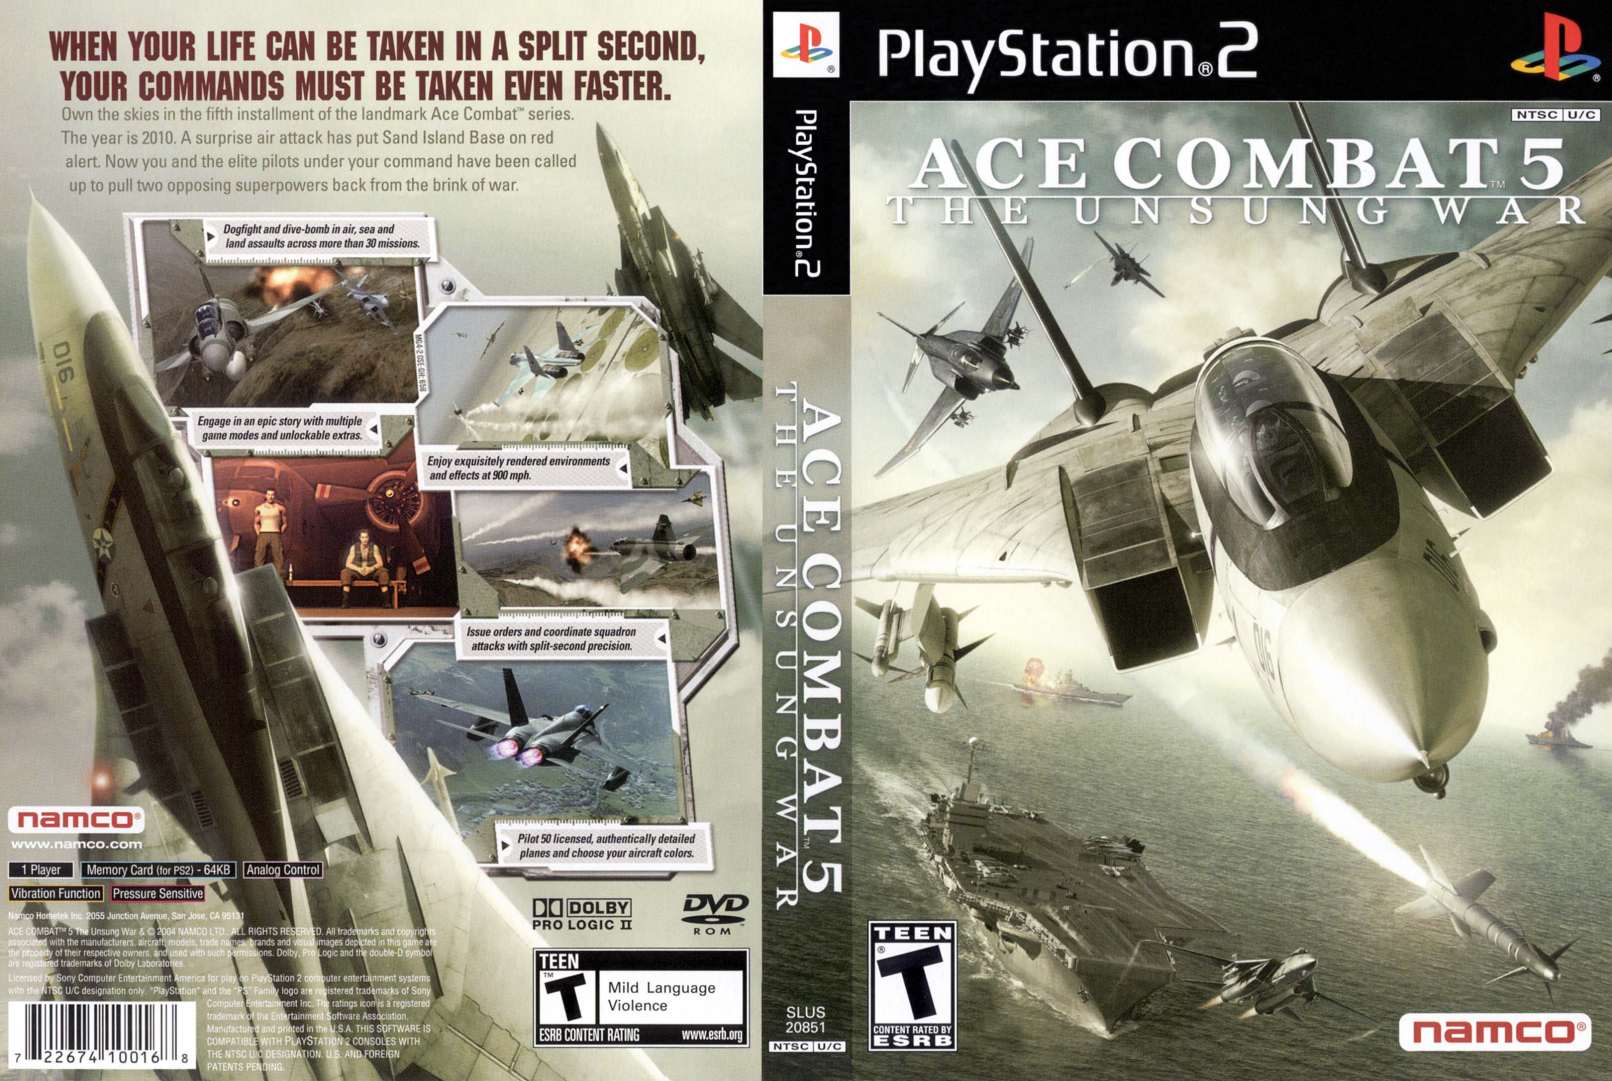 Ace combat 5 pc game download